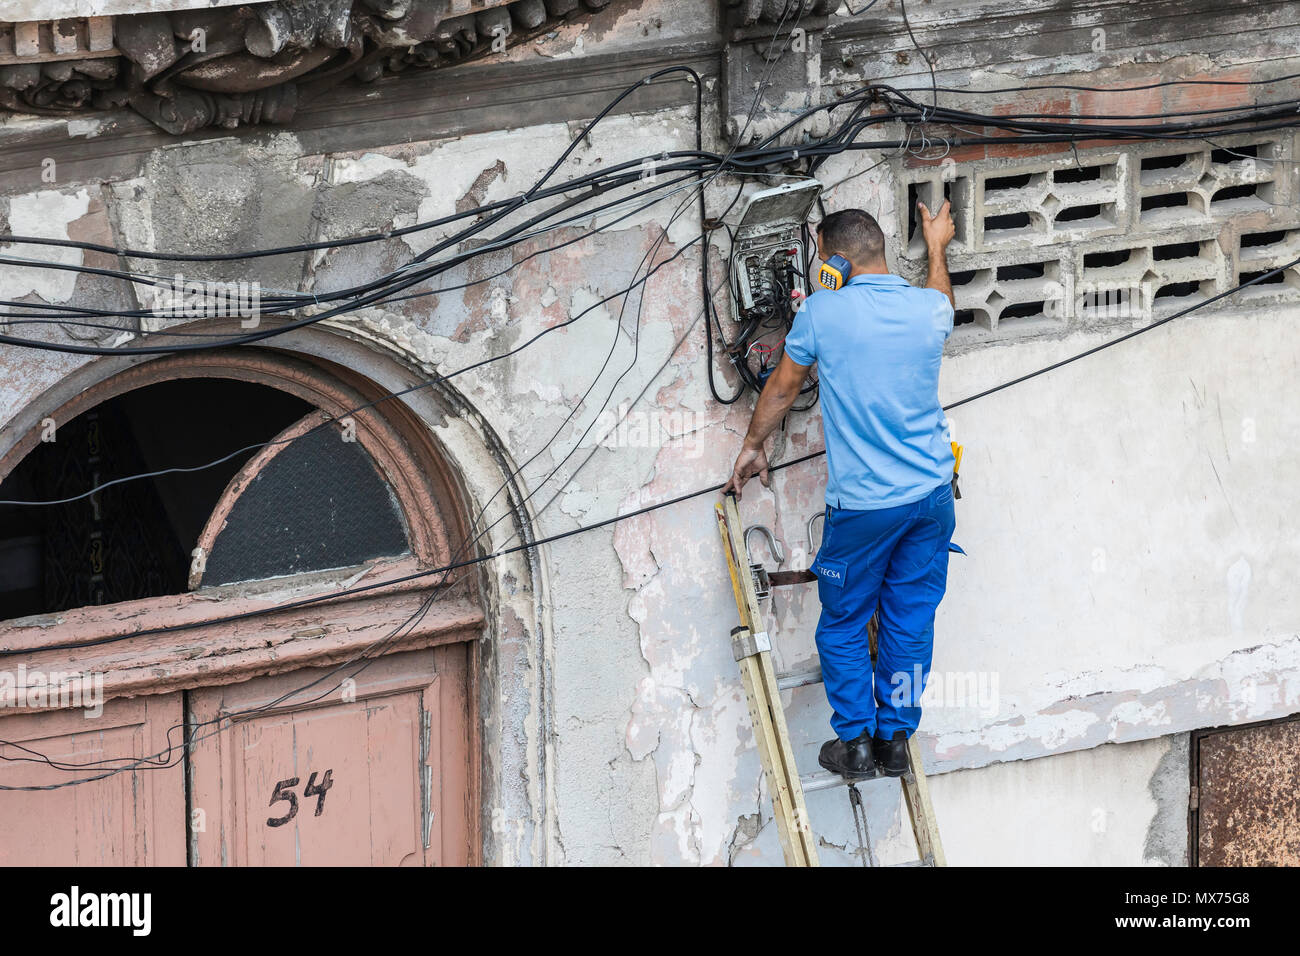 A worker fixing telephone lines in old Havana, Cuba Stock Photo